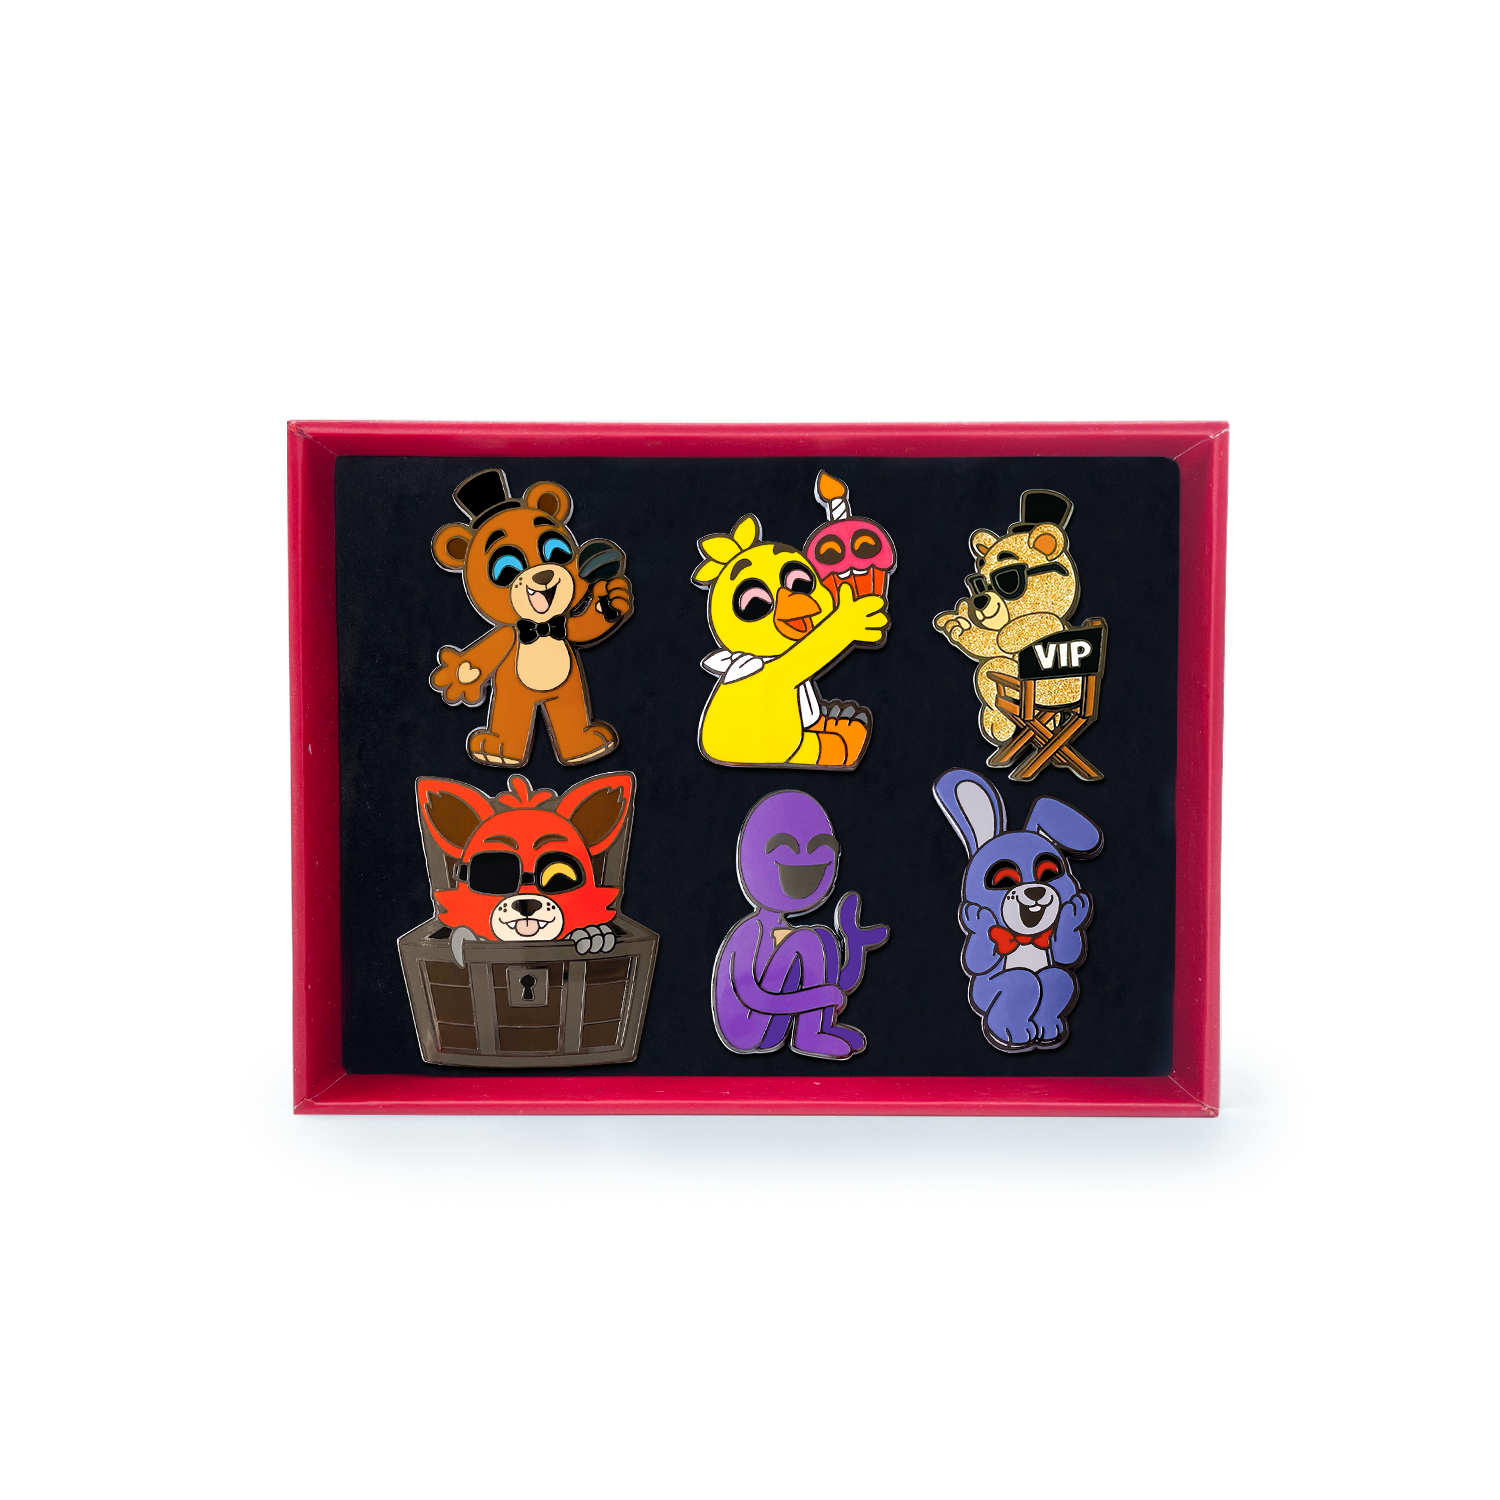 Five Nights at Freddys Security Breach Boxed Pin Set of 6